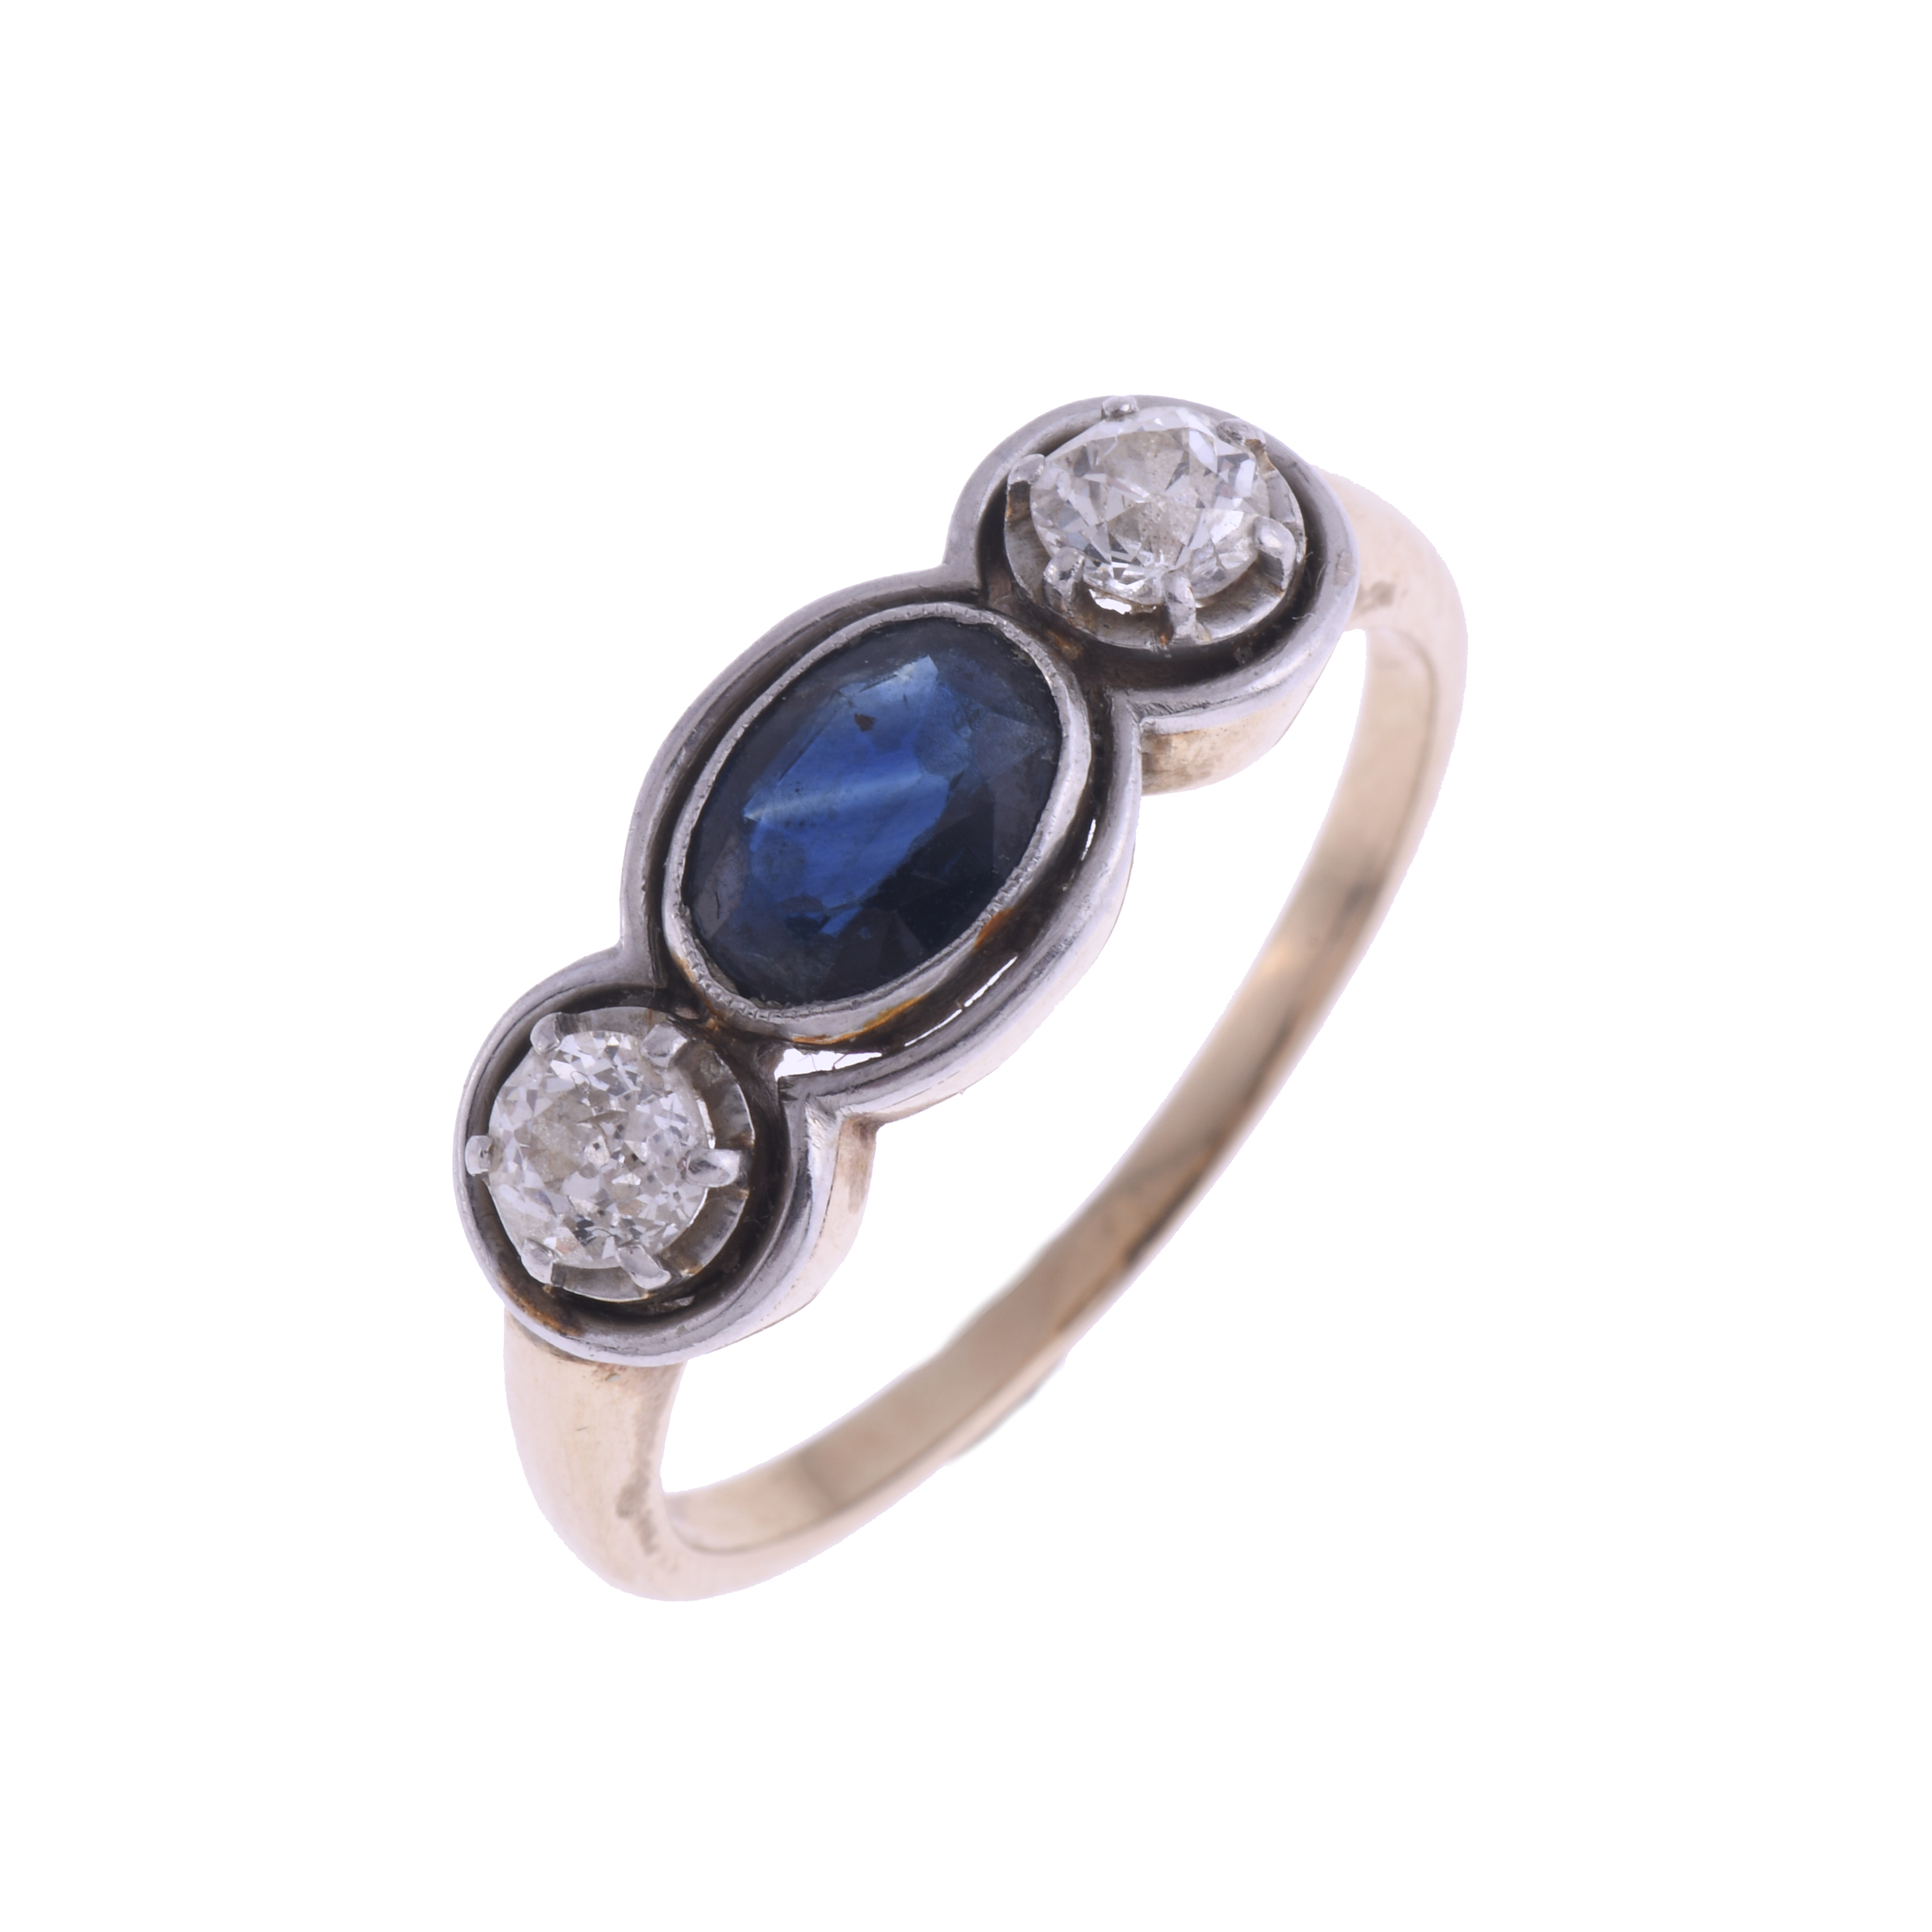 DIAMONDS AND SAPPHIRE TRIPLET RING.